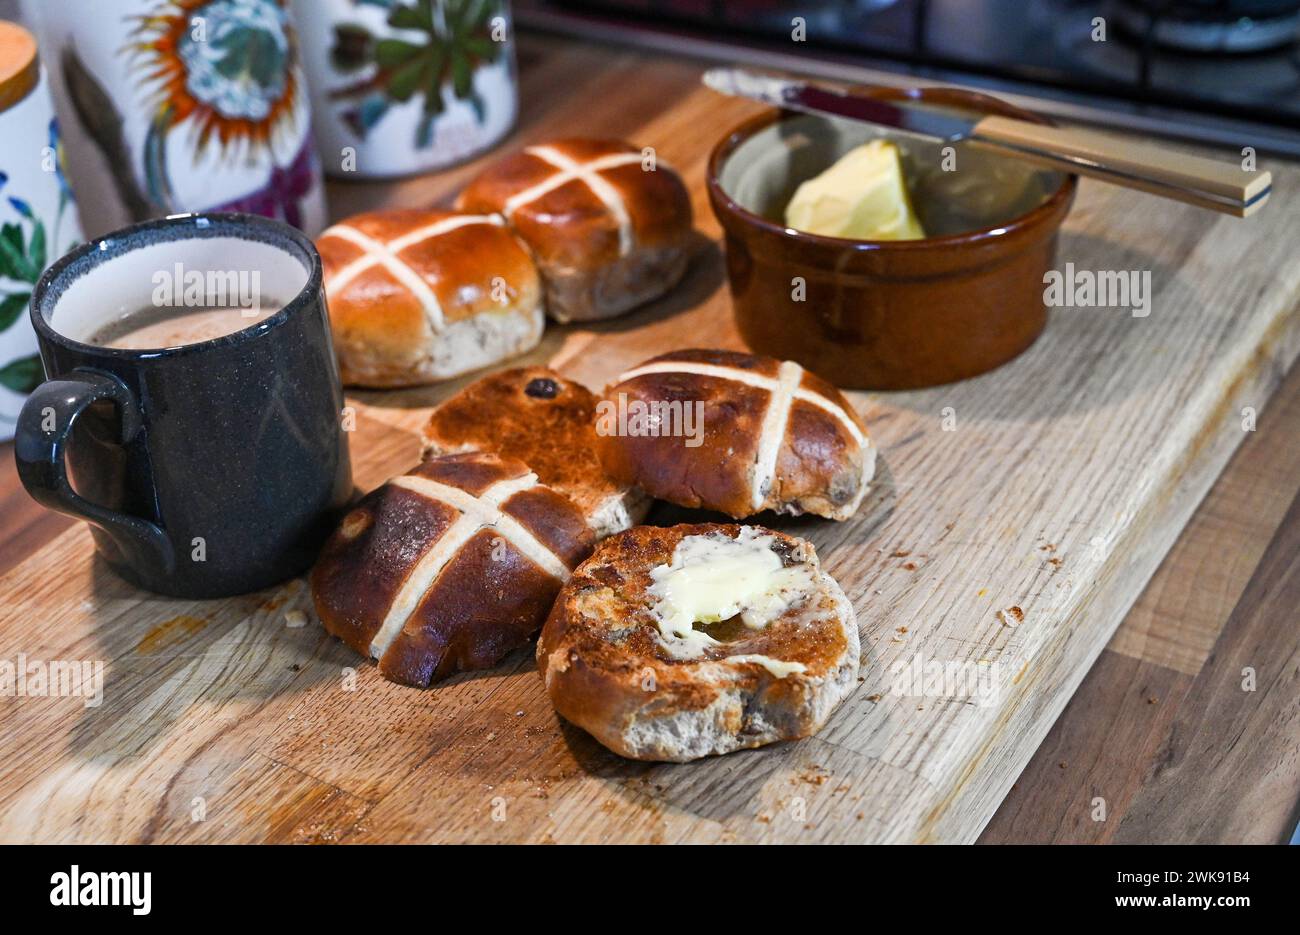 Toasted Hot Cross Buns with butter a traditional breakfast food eaten at Easter Stock Photo